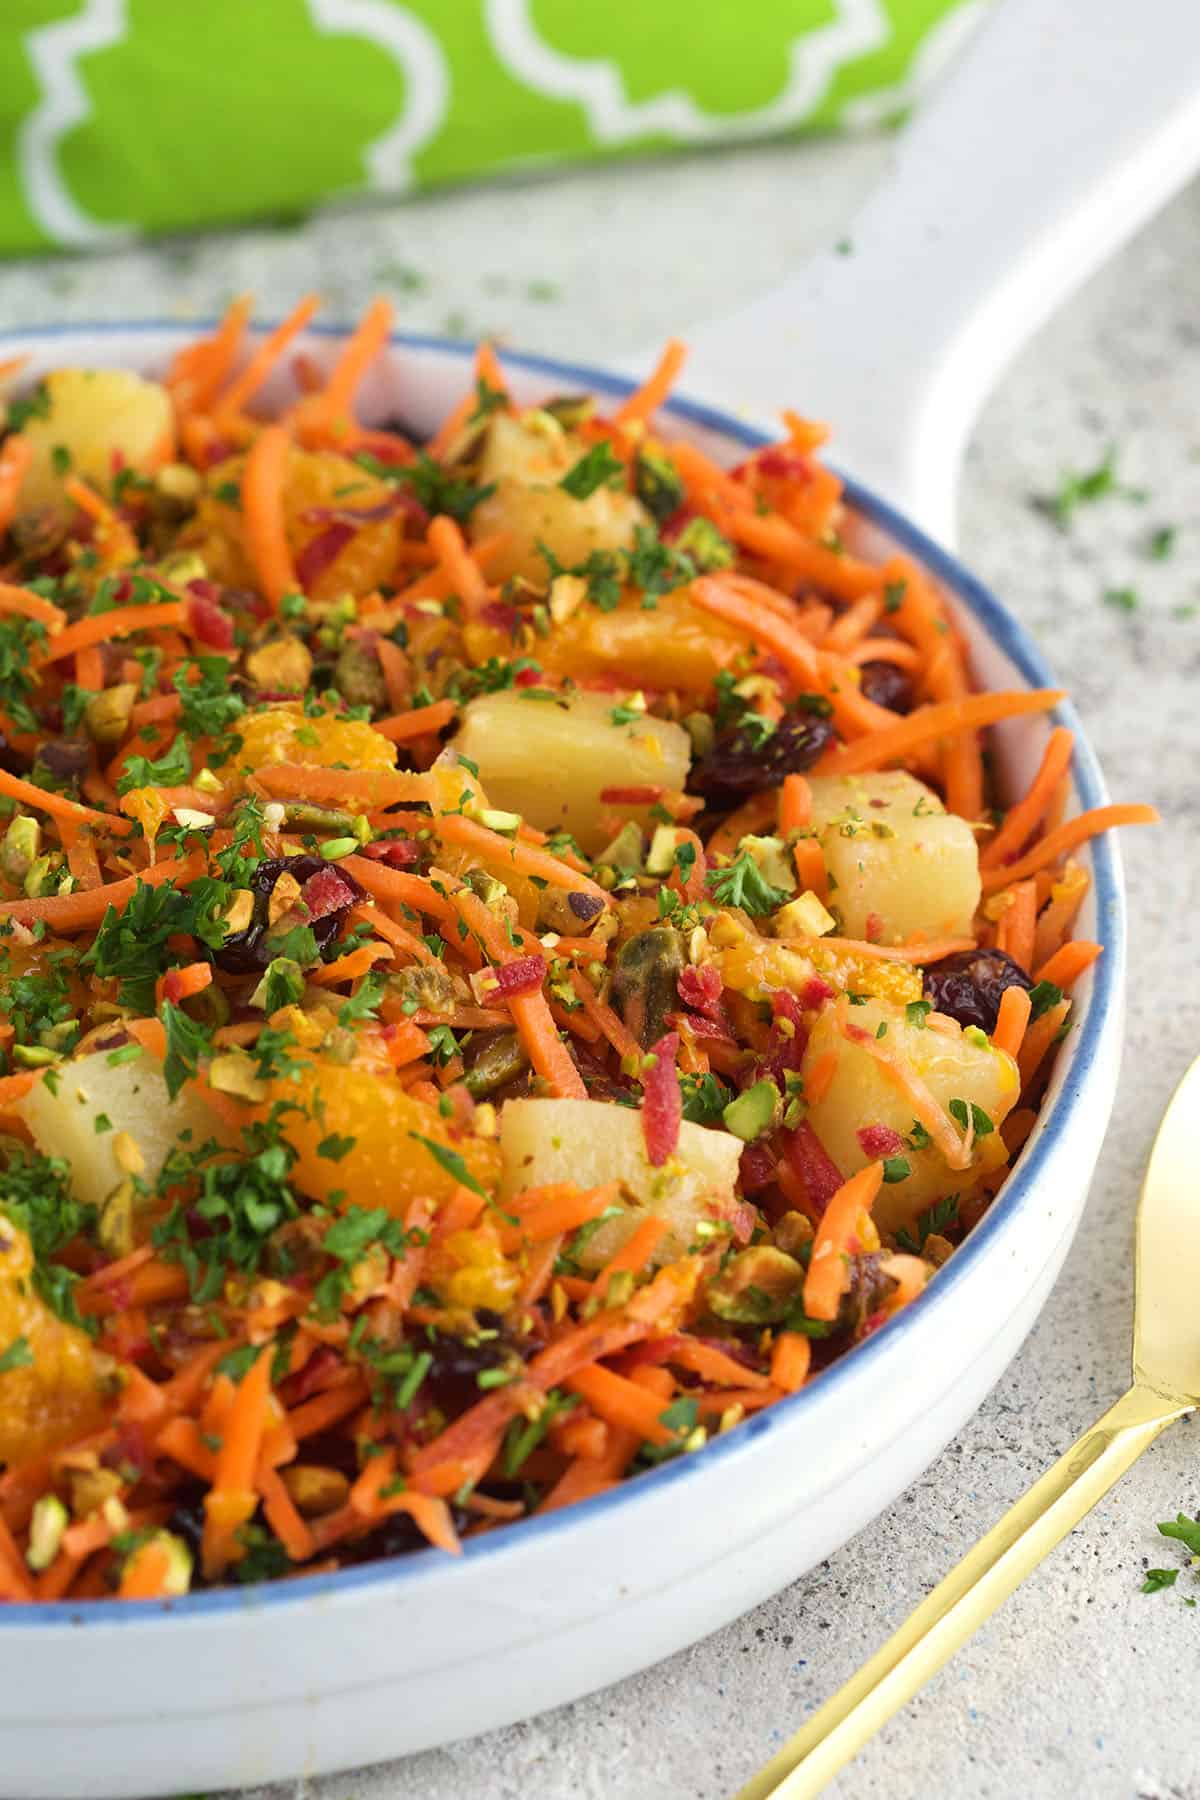 A bowl is filled with carrot salad.